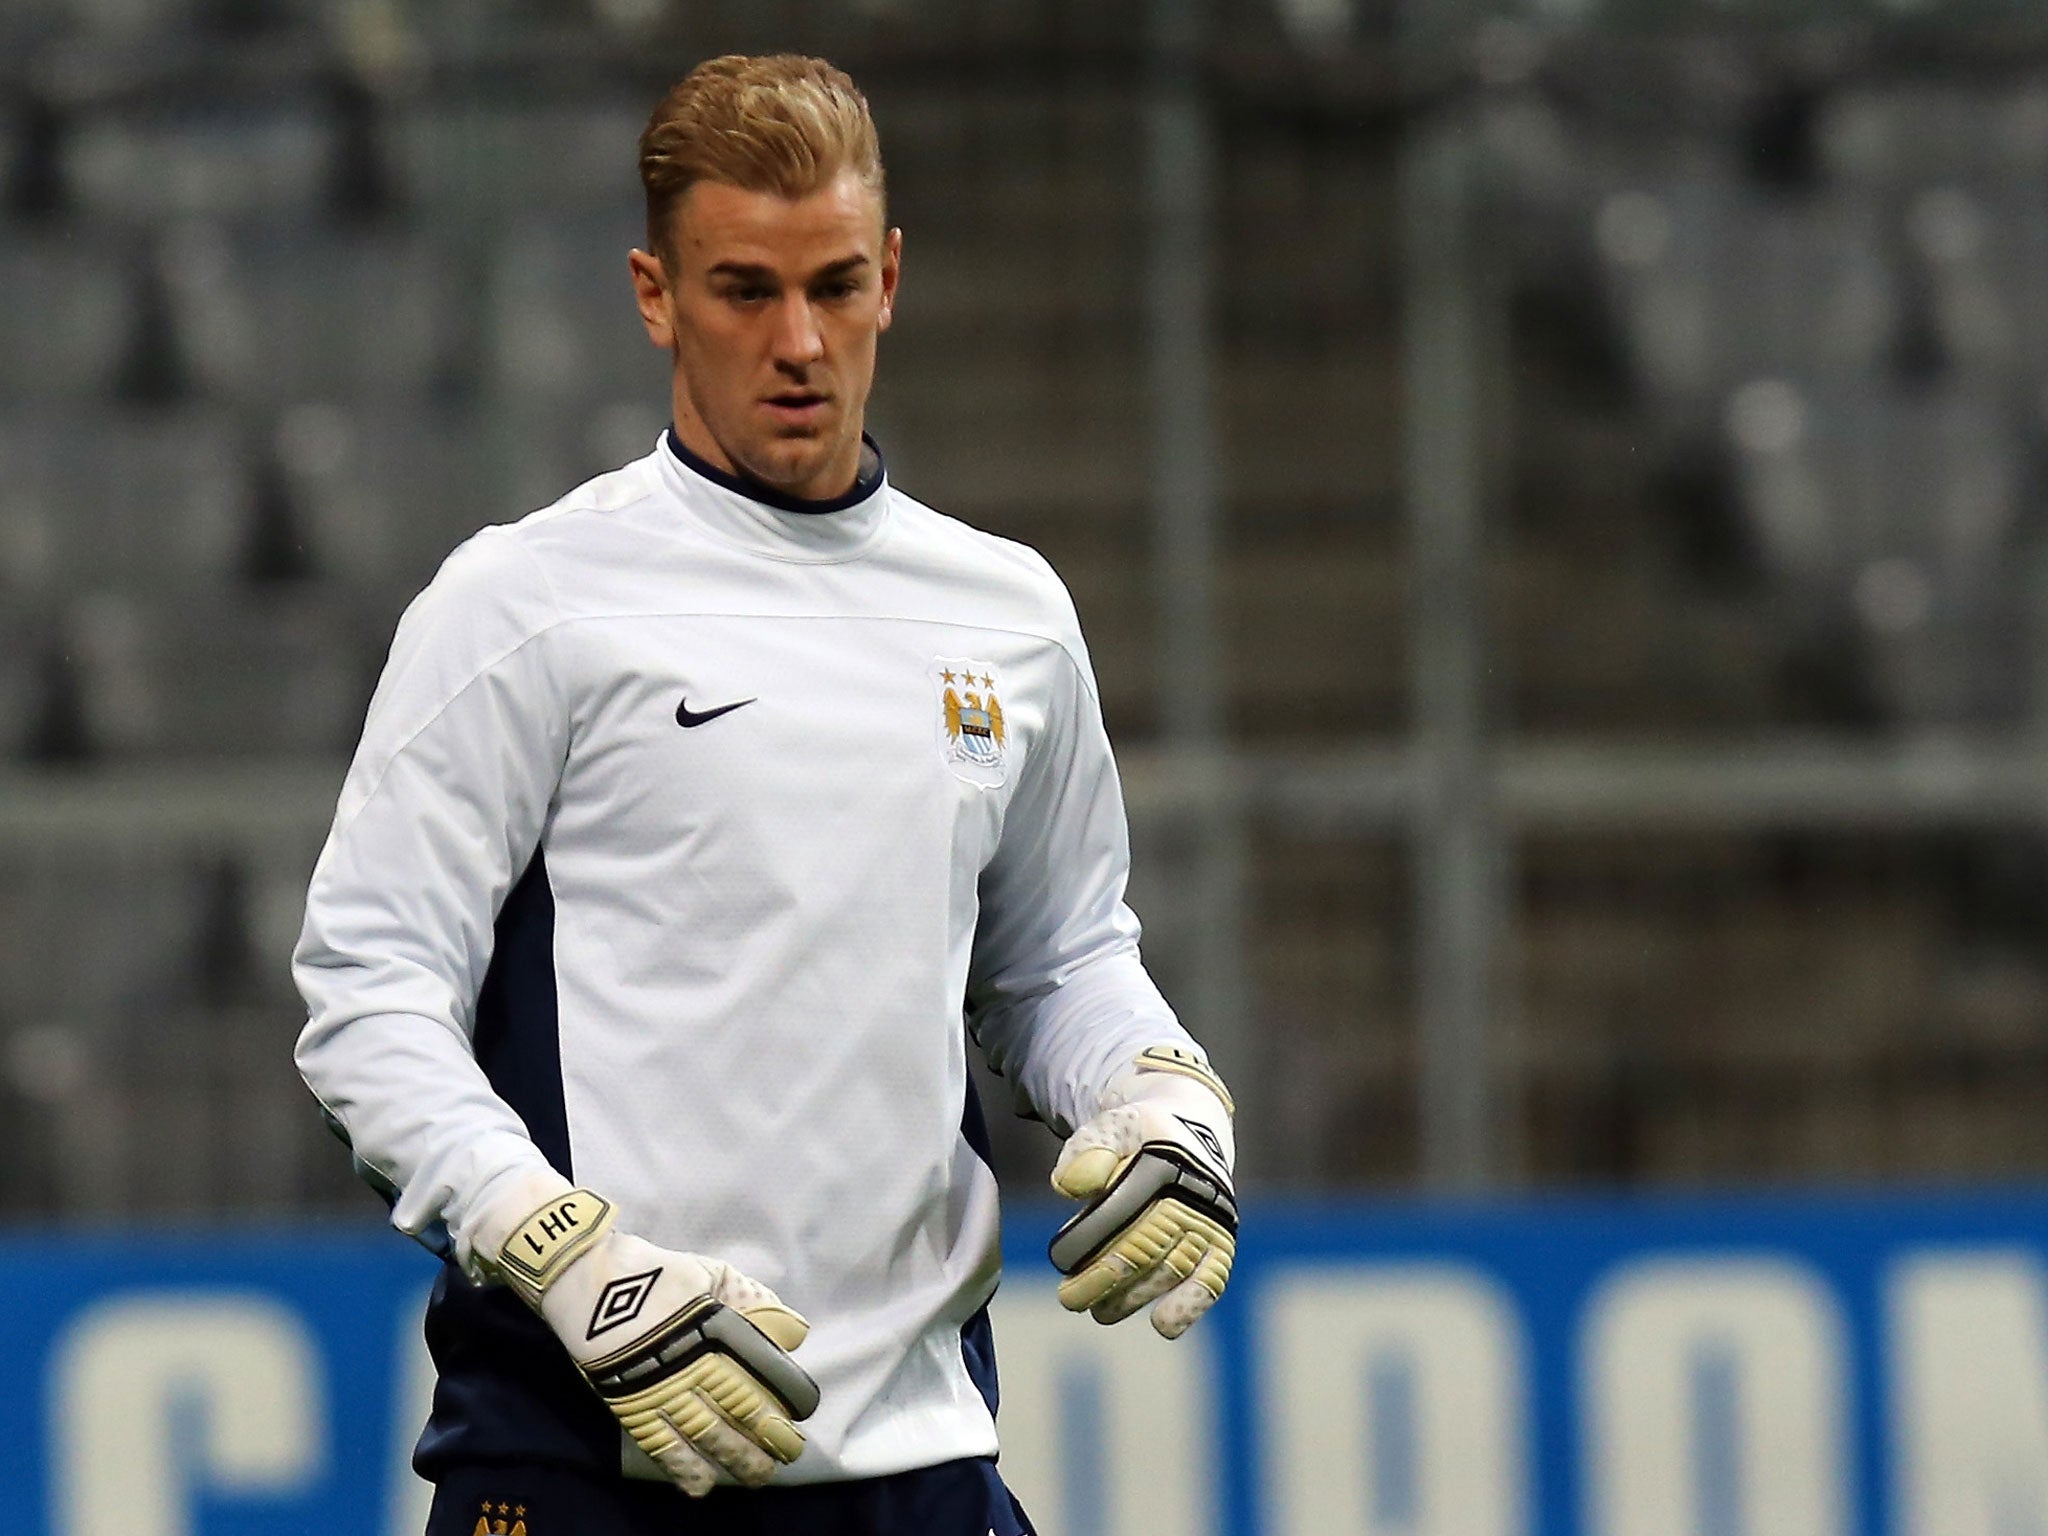 Goalkeeper Joe Hart plays the ball during a Manchester City training session at Allianz Arena